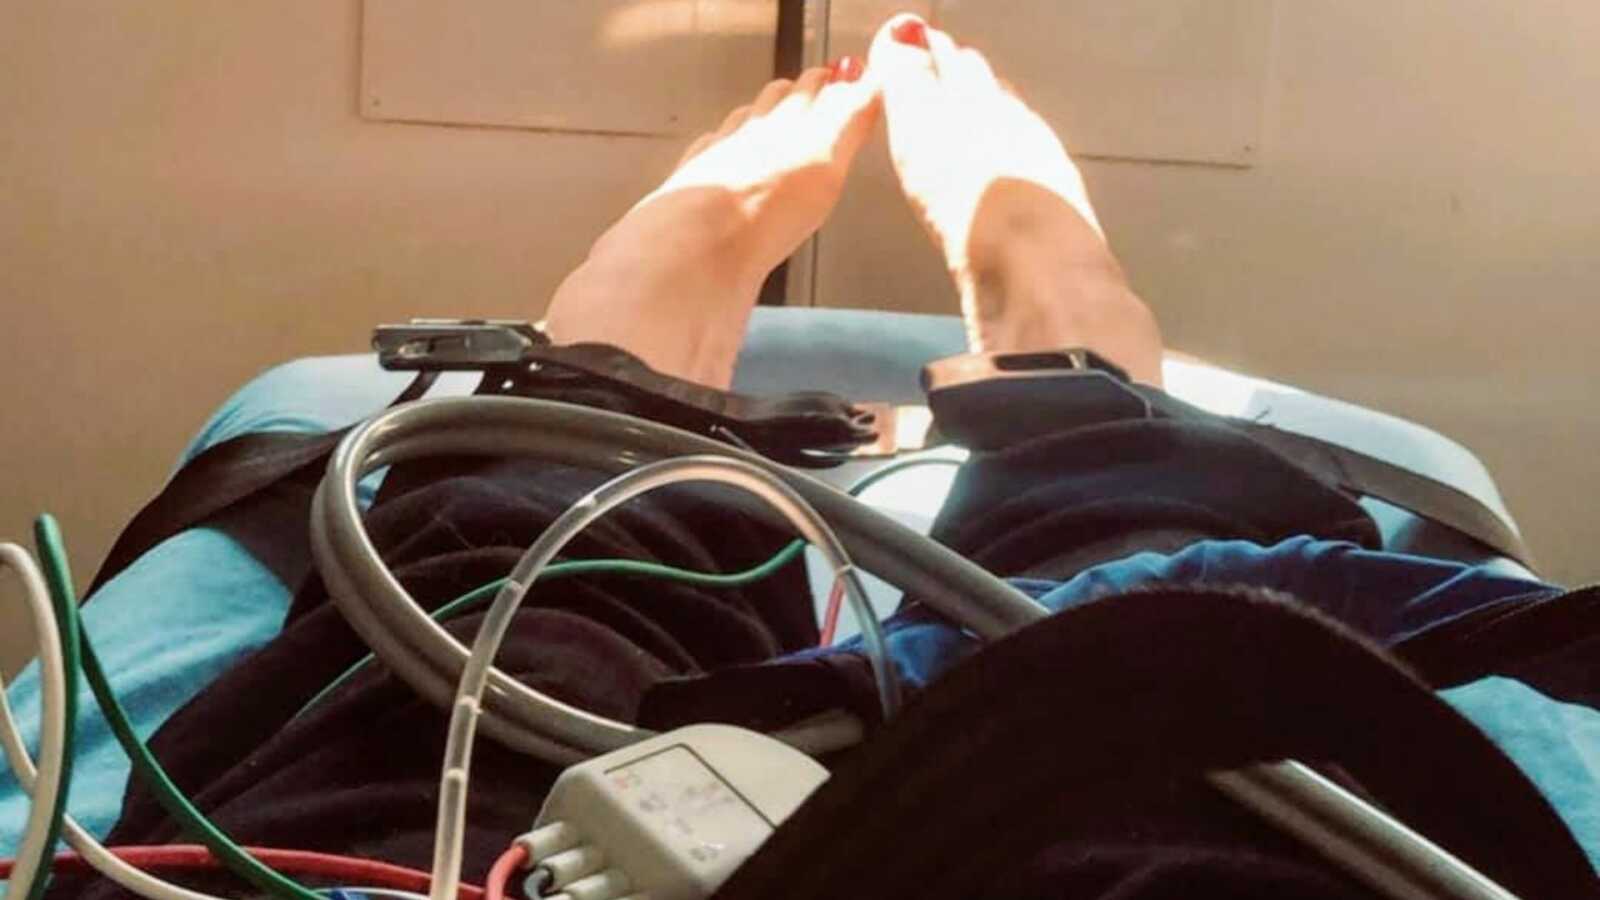 Woman suffering from anxiety takes a photo in the back of an ambulance after a bad panic attack